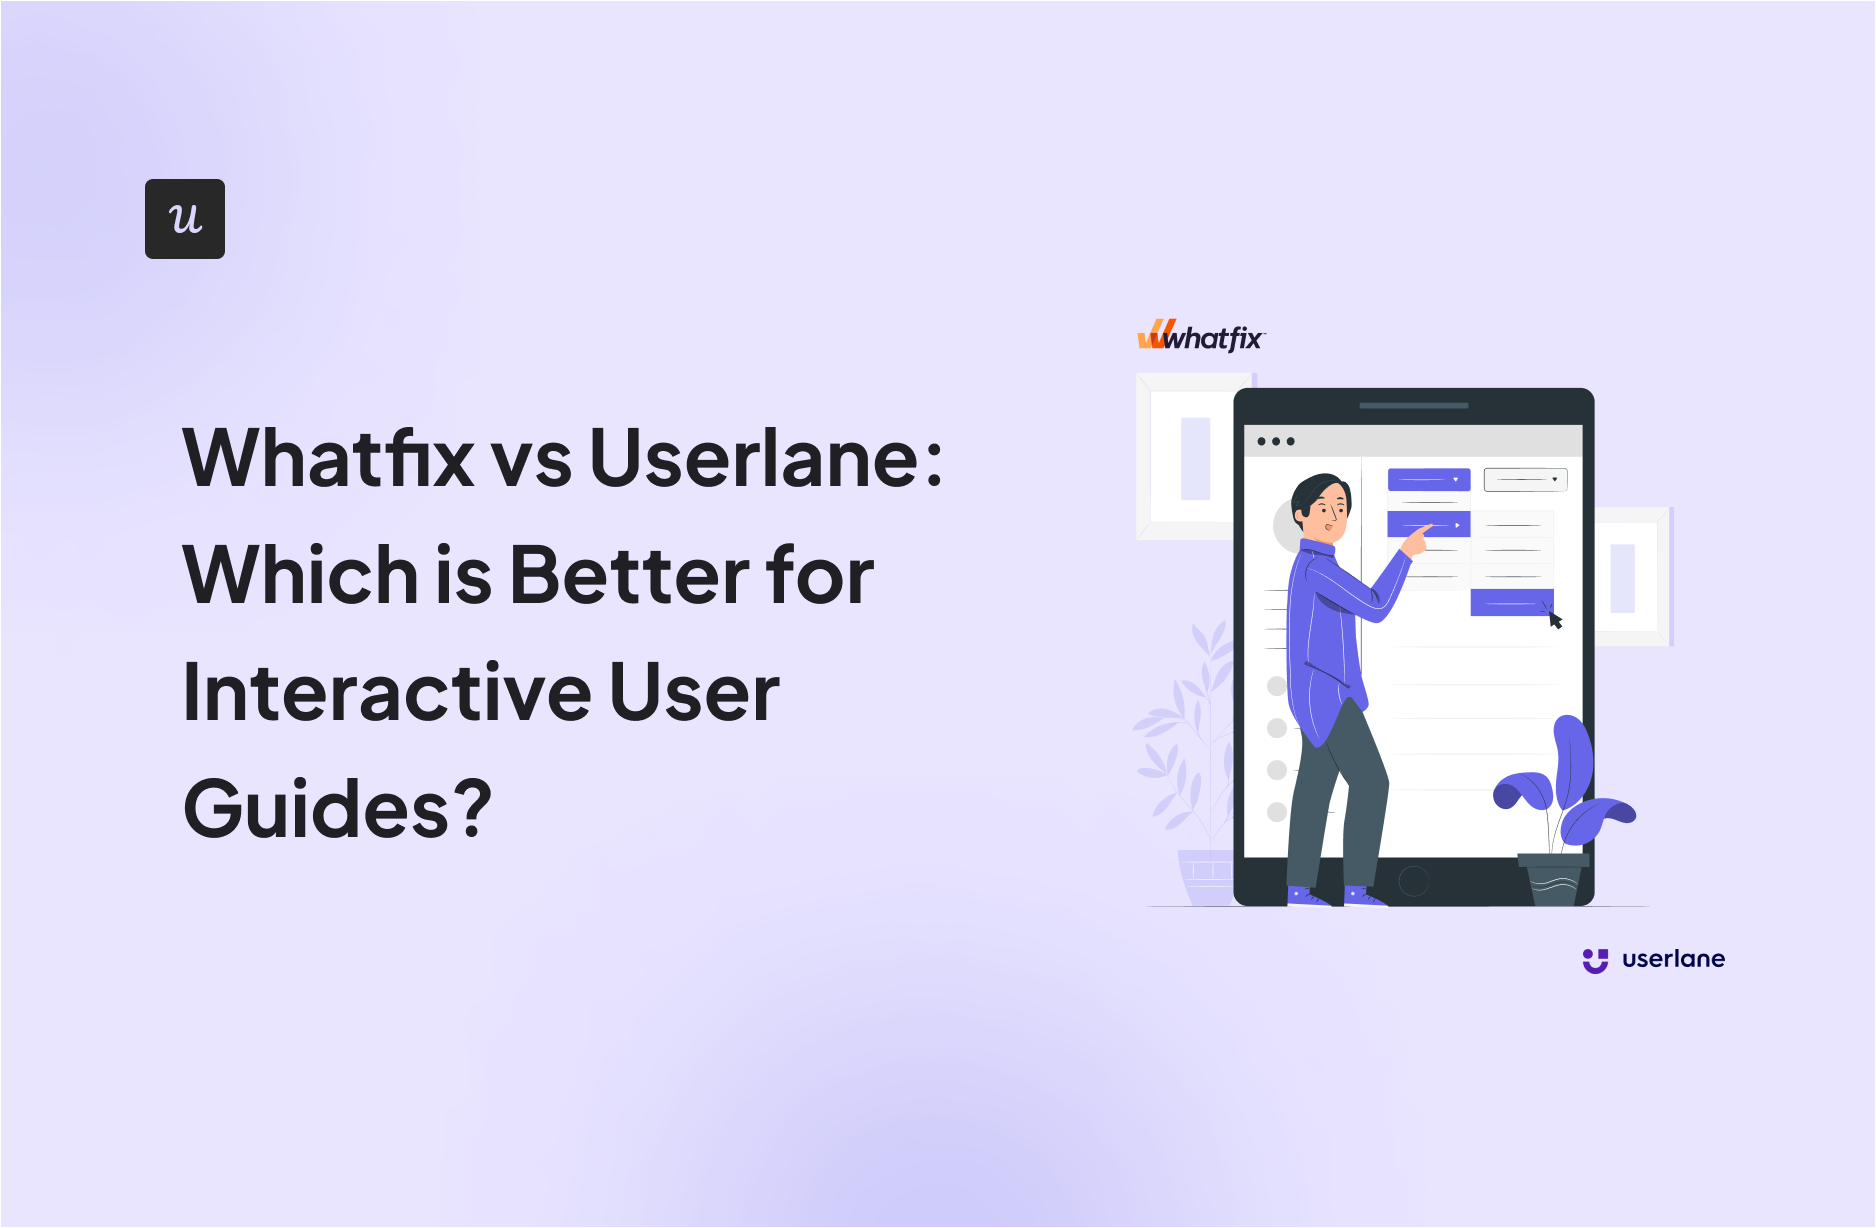 Whatfix vs Userlane: Which is Better for Interactive User Guides?